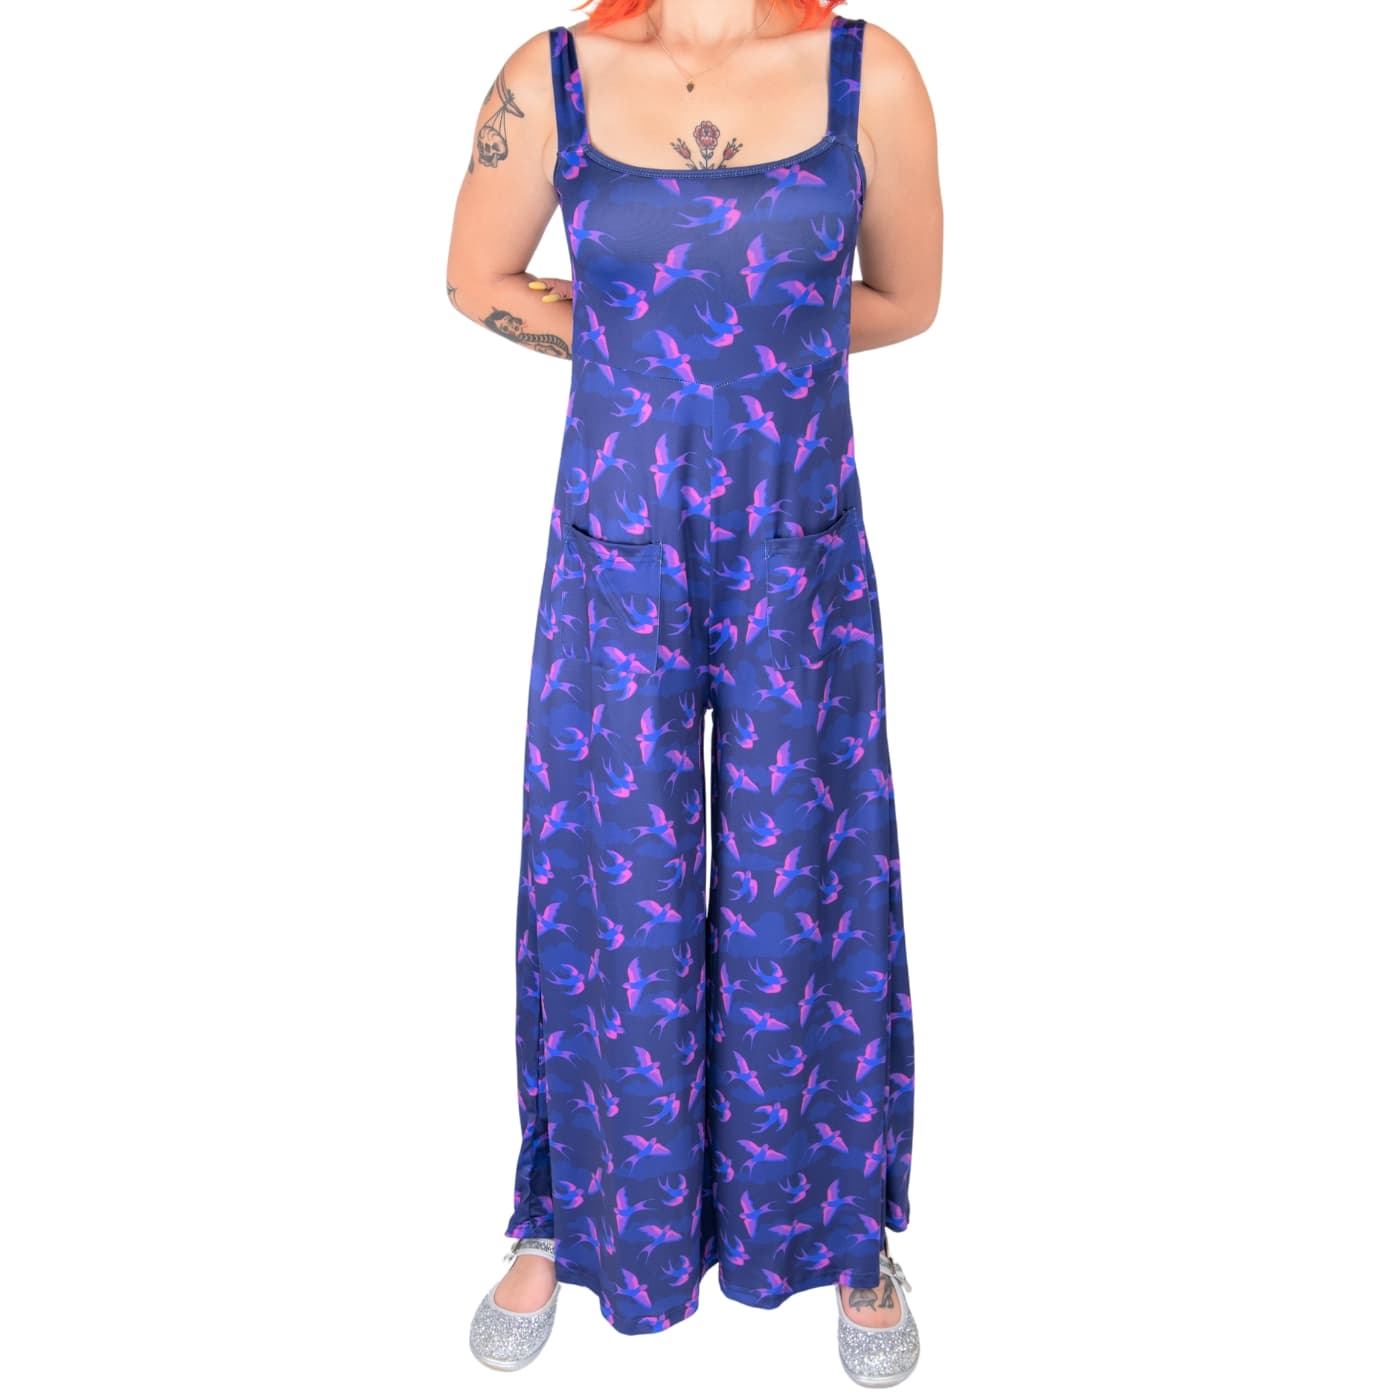 Swoop Jumpsuit by RainbowsAndFairies.com.au (Swallows - Bird Print - Overalls - Wide Leg Pants - Vintage Inspired - Kitsch - Pink Swallows - Blue) - SKU: CL_JUMPS_SWOOP_ORG - Pic-01